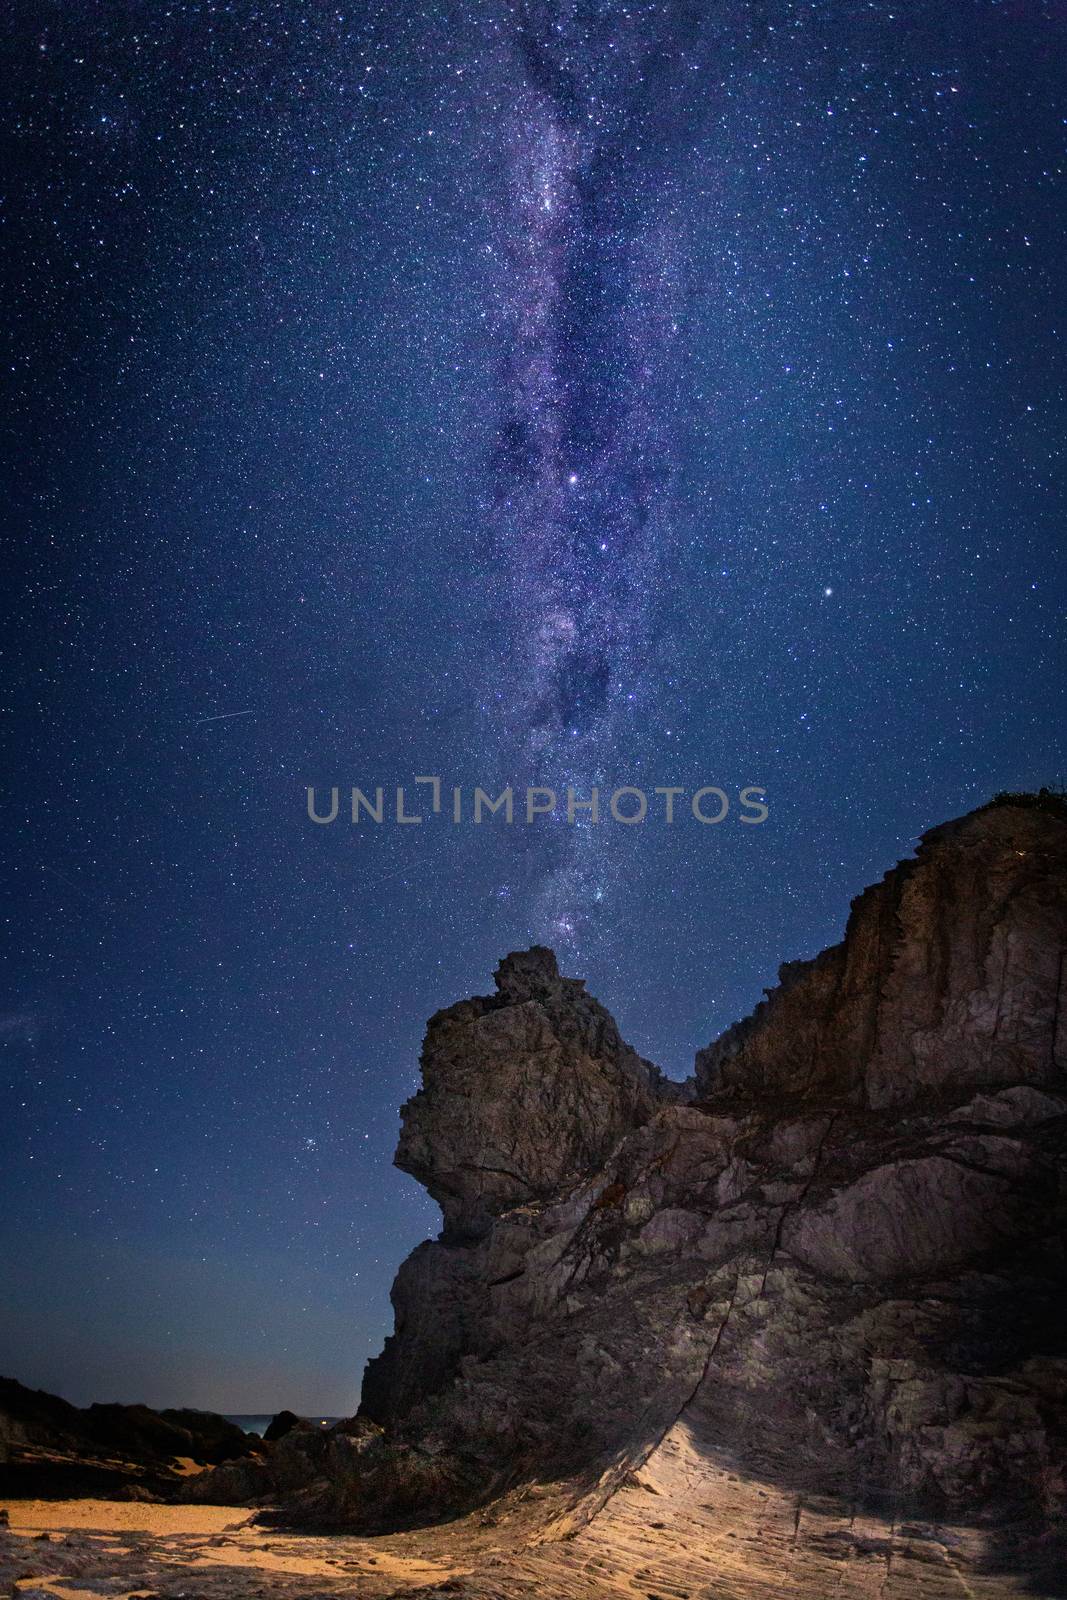 Queen Victoria Rock under a sky full of stars and the Milky Way